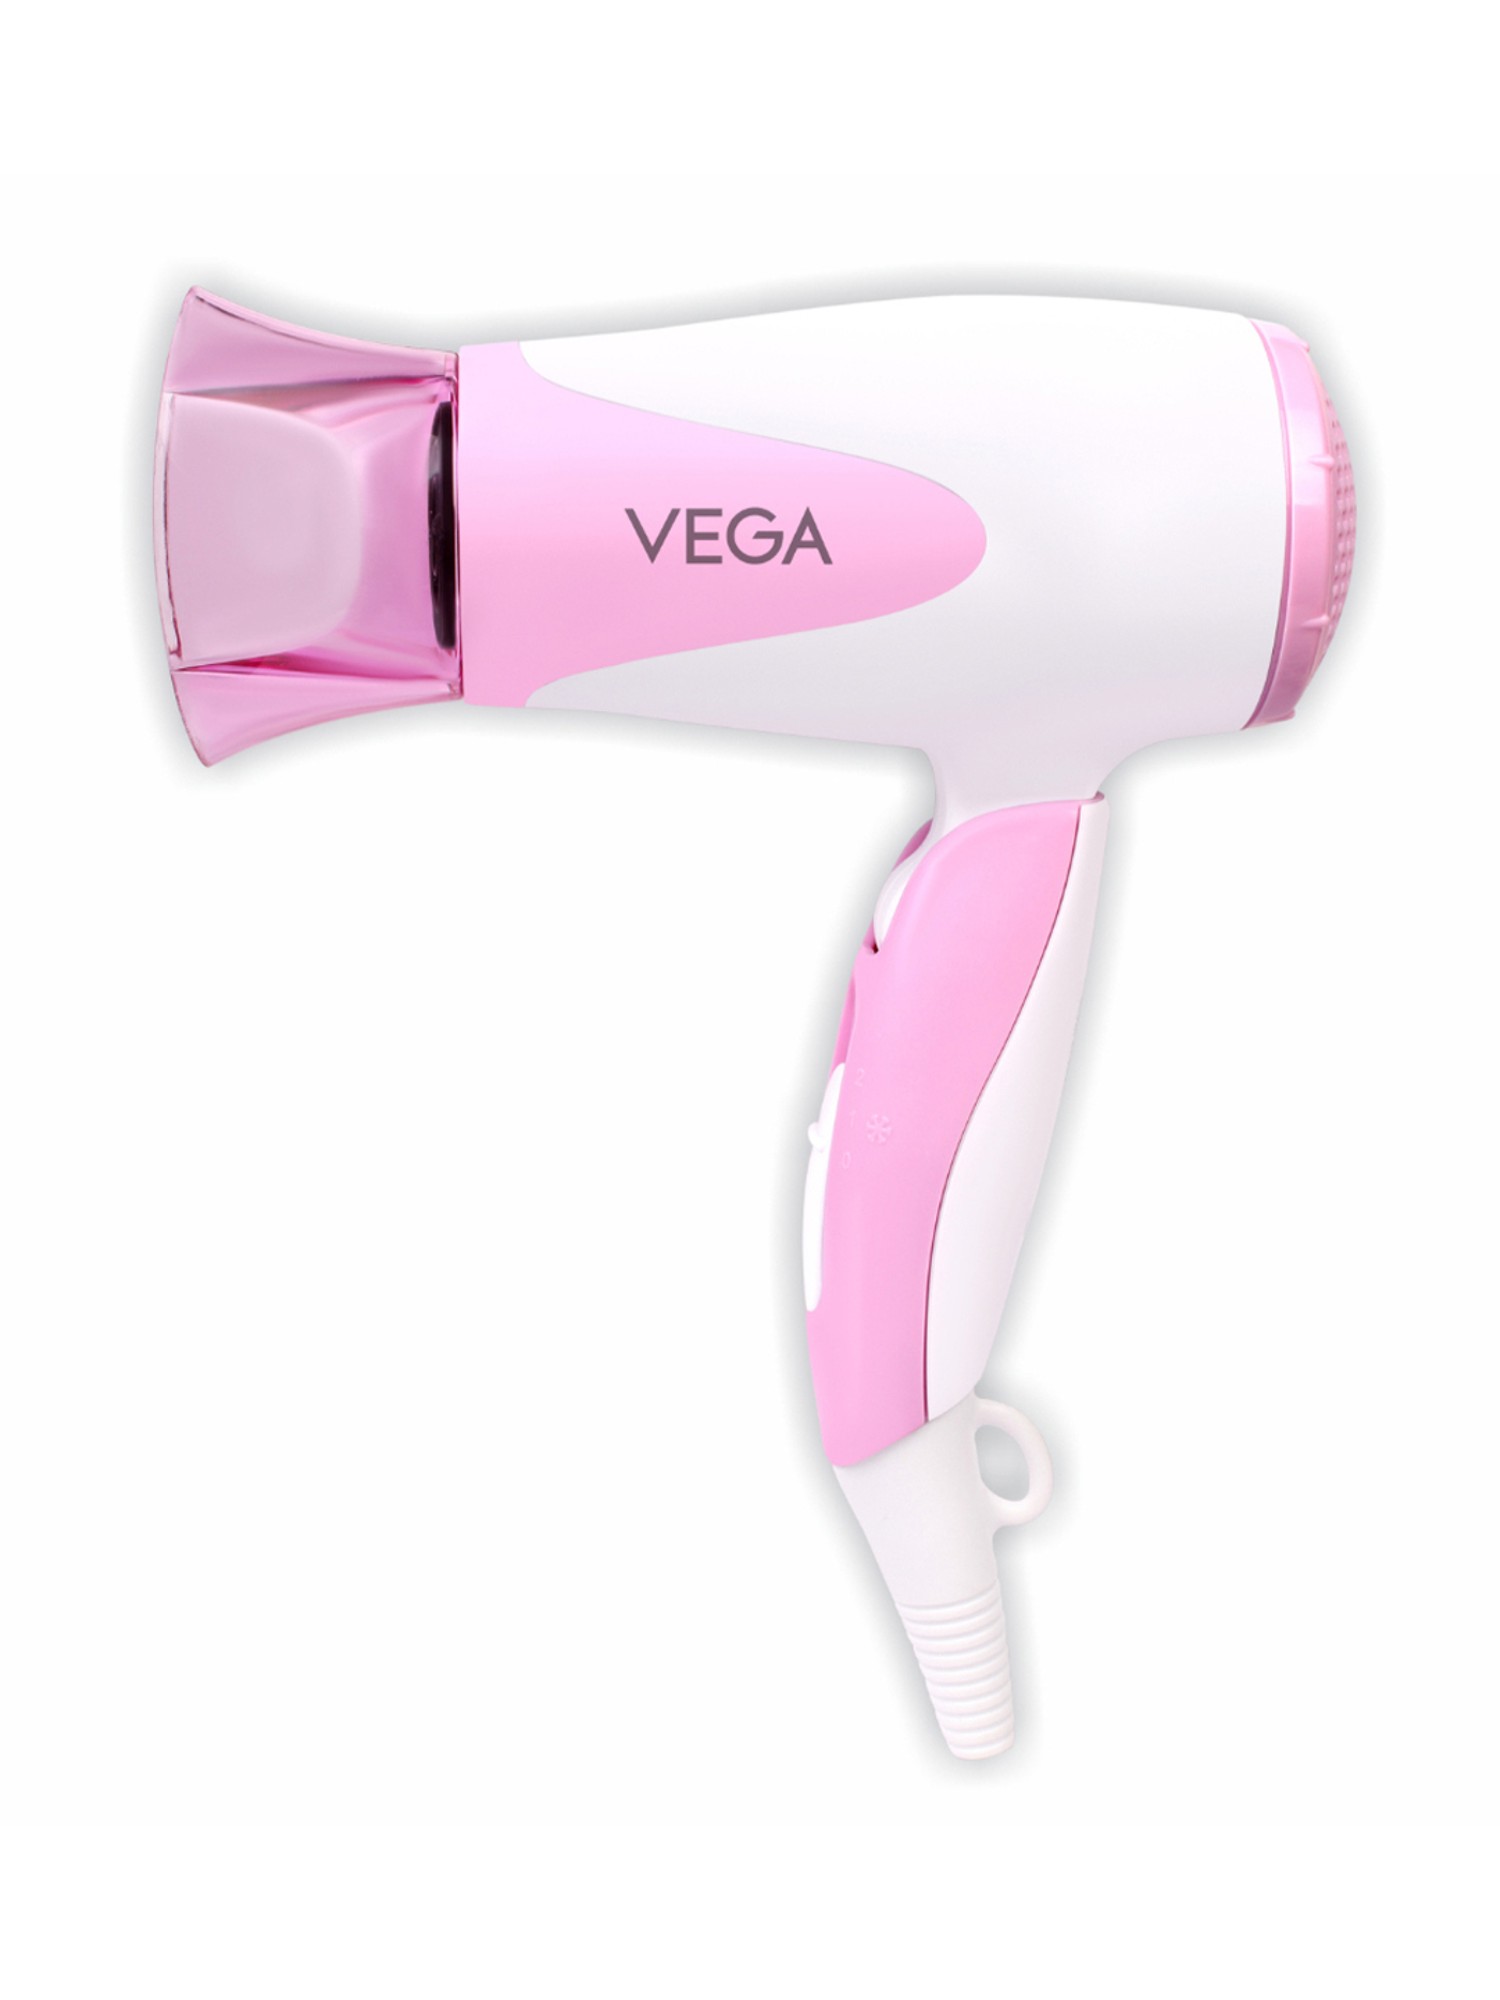 Hair Dryer, Lightweight Hairdryer for Women - with Adjustable Temperature,  Speed Control, Cool Setting - by Lily England in Rose Gold / White (UK  Plug), Beauty & Personal Care, Hair on Carousell